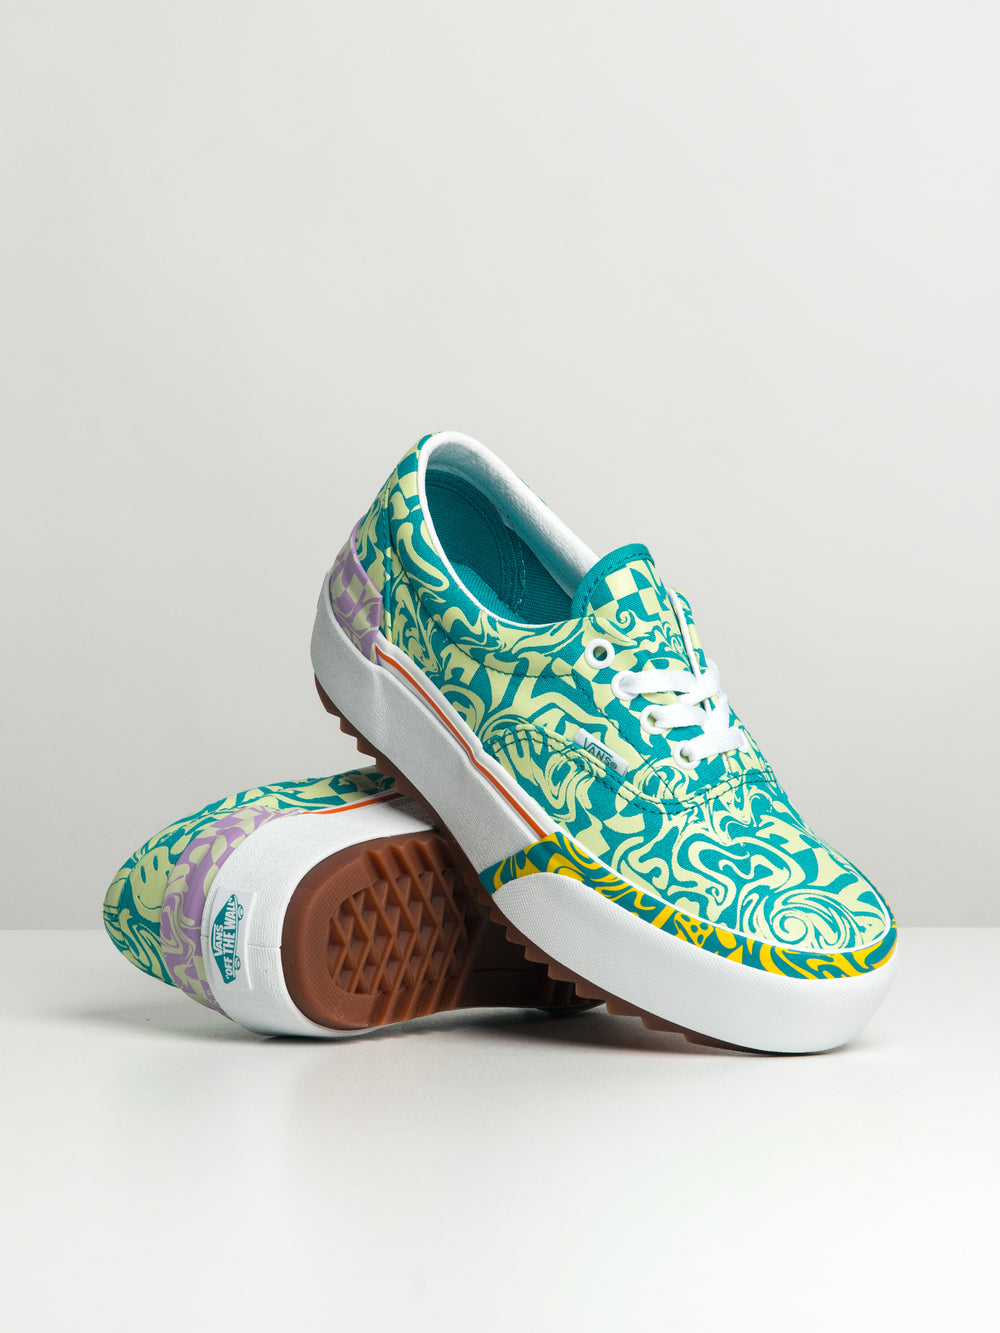 WOMENS VANS ERA STACKED - CLEARANCE